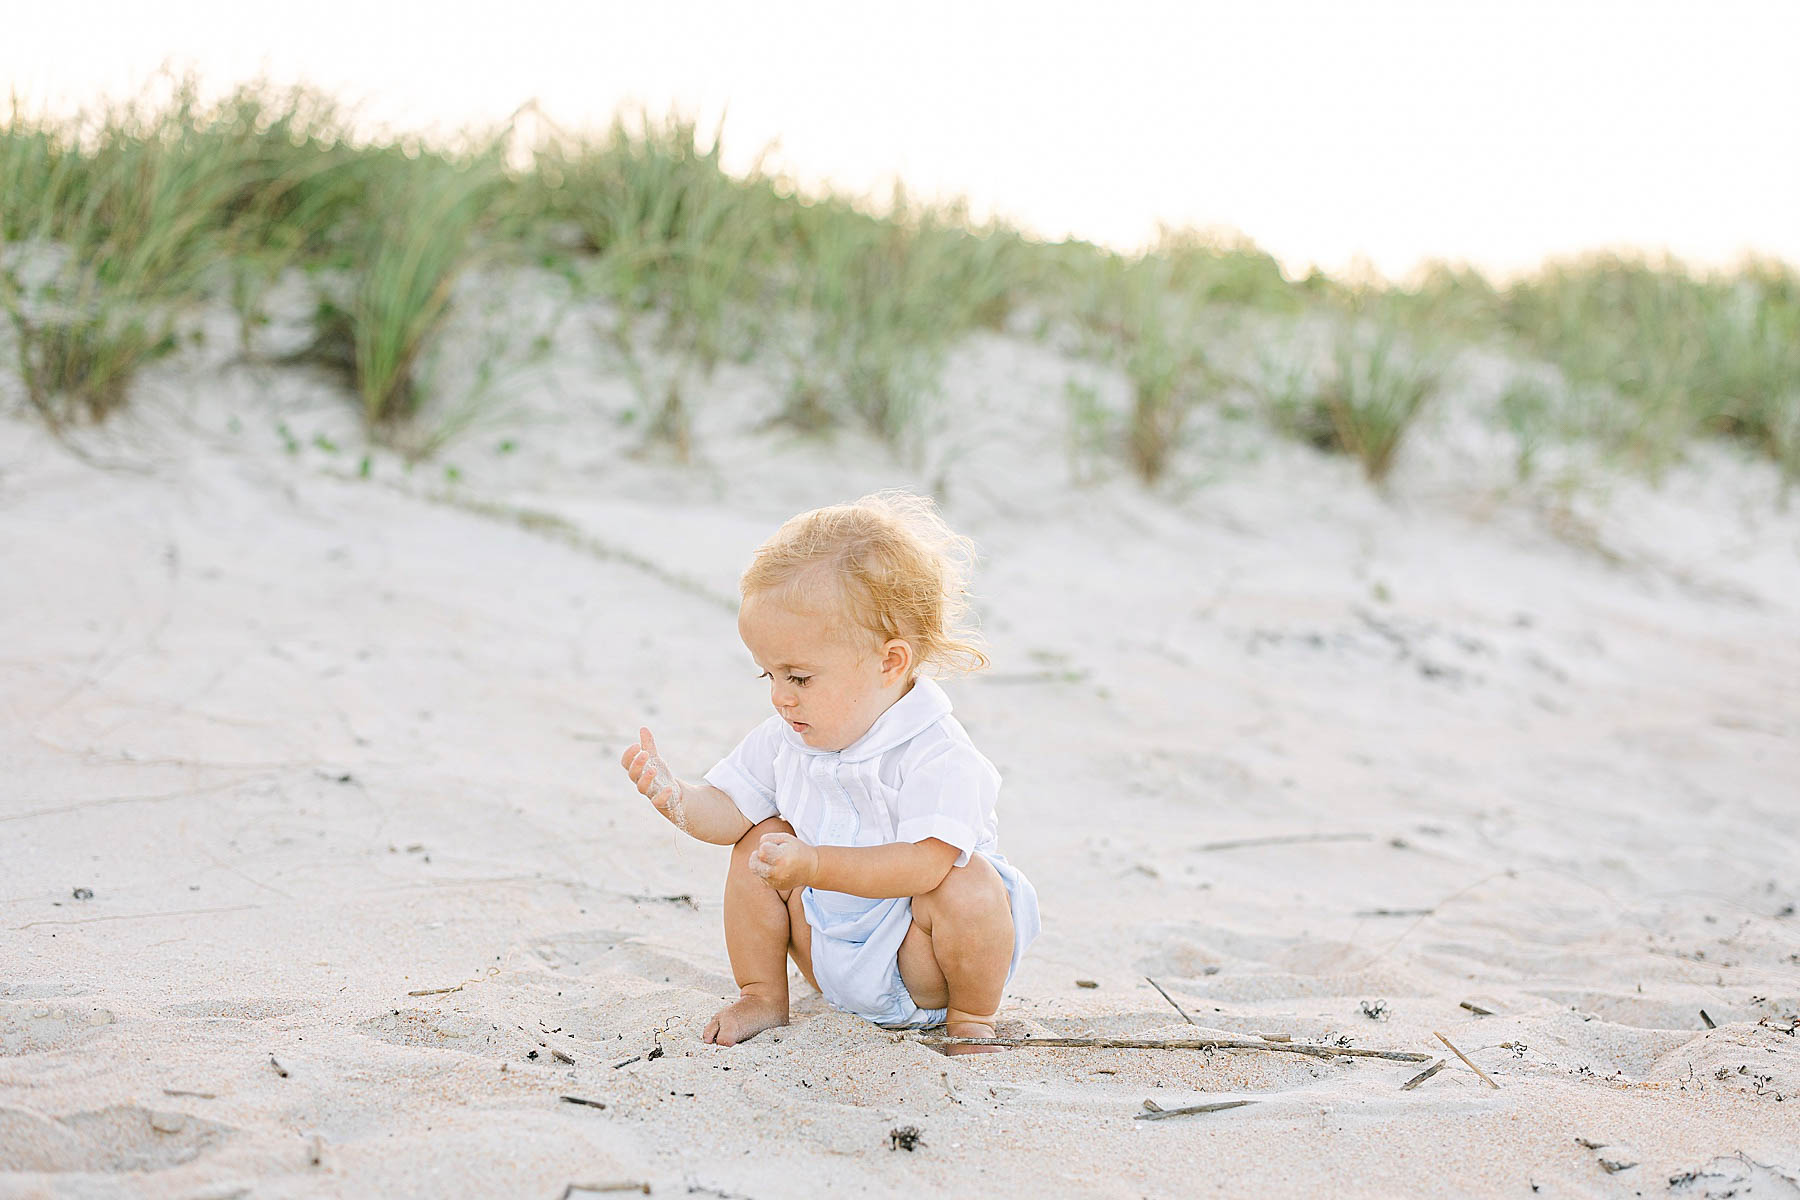 baby boy on playing with sand on the beach at sunset wearing white shirt